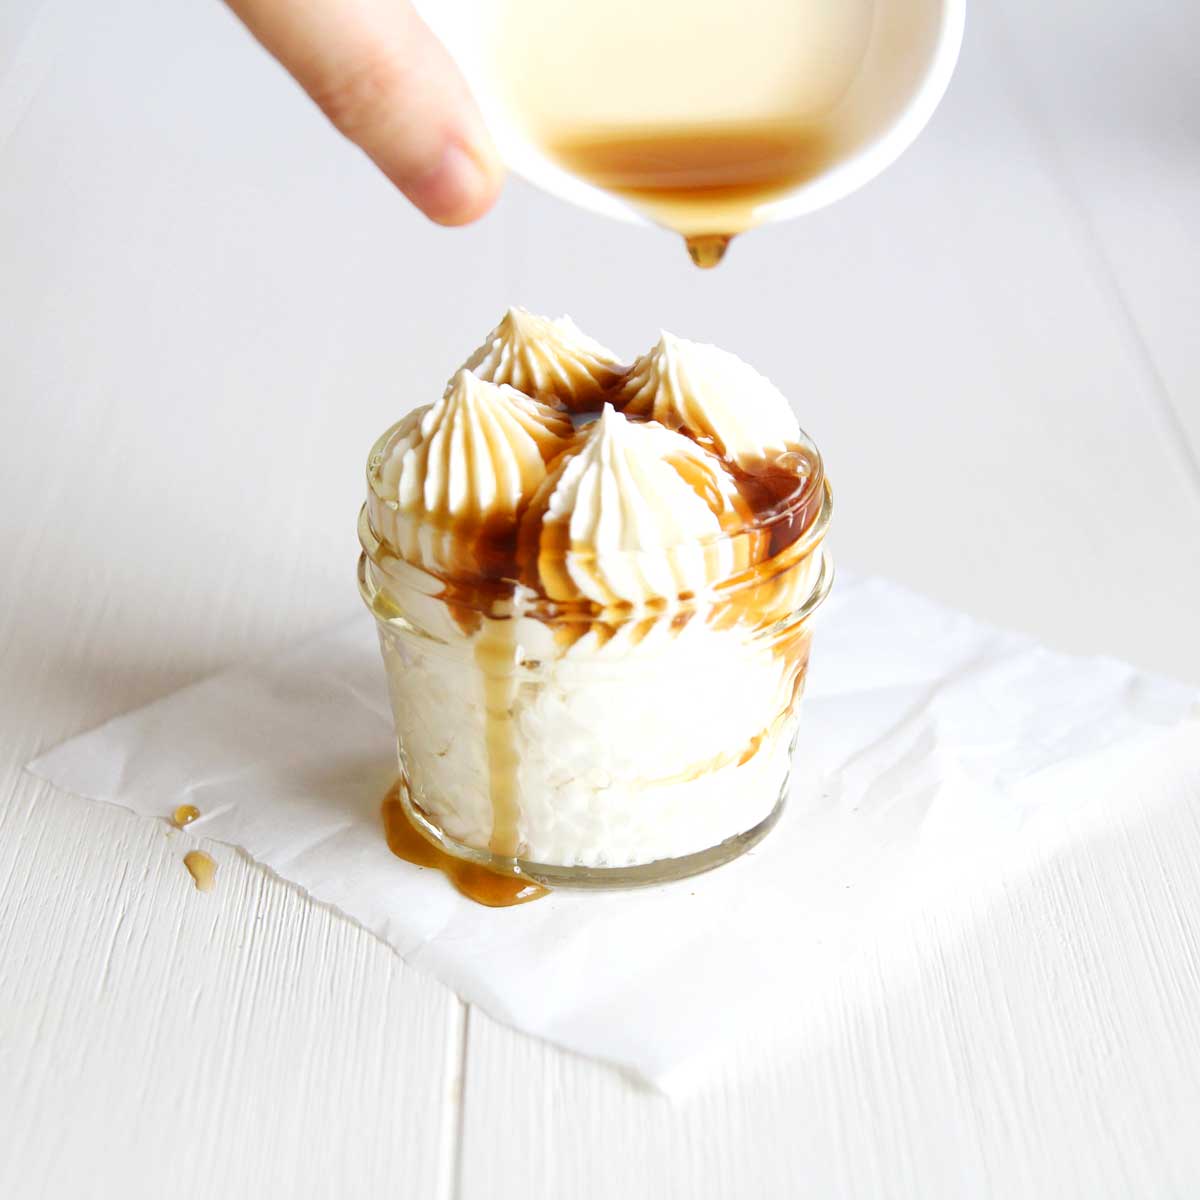 Maple Whipped Cream Stabilized with Cream Cheese